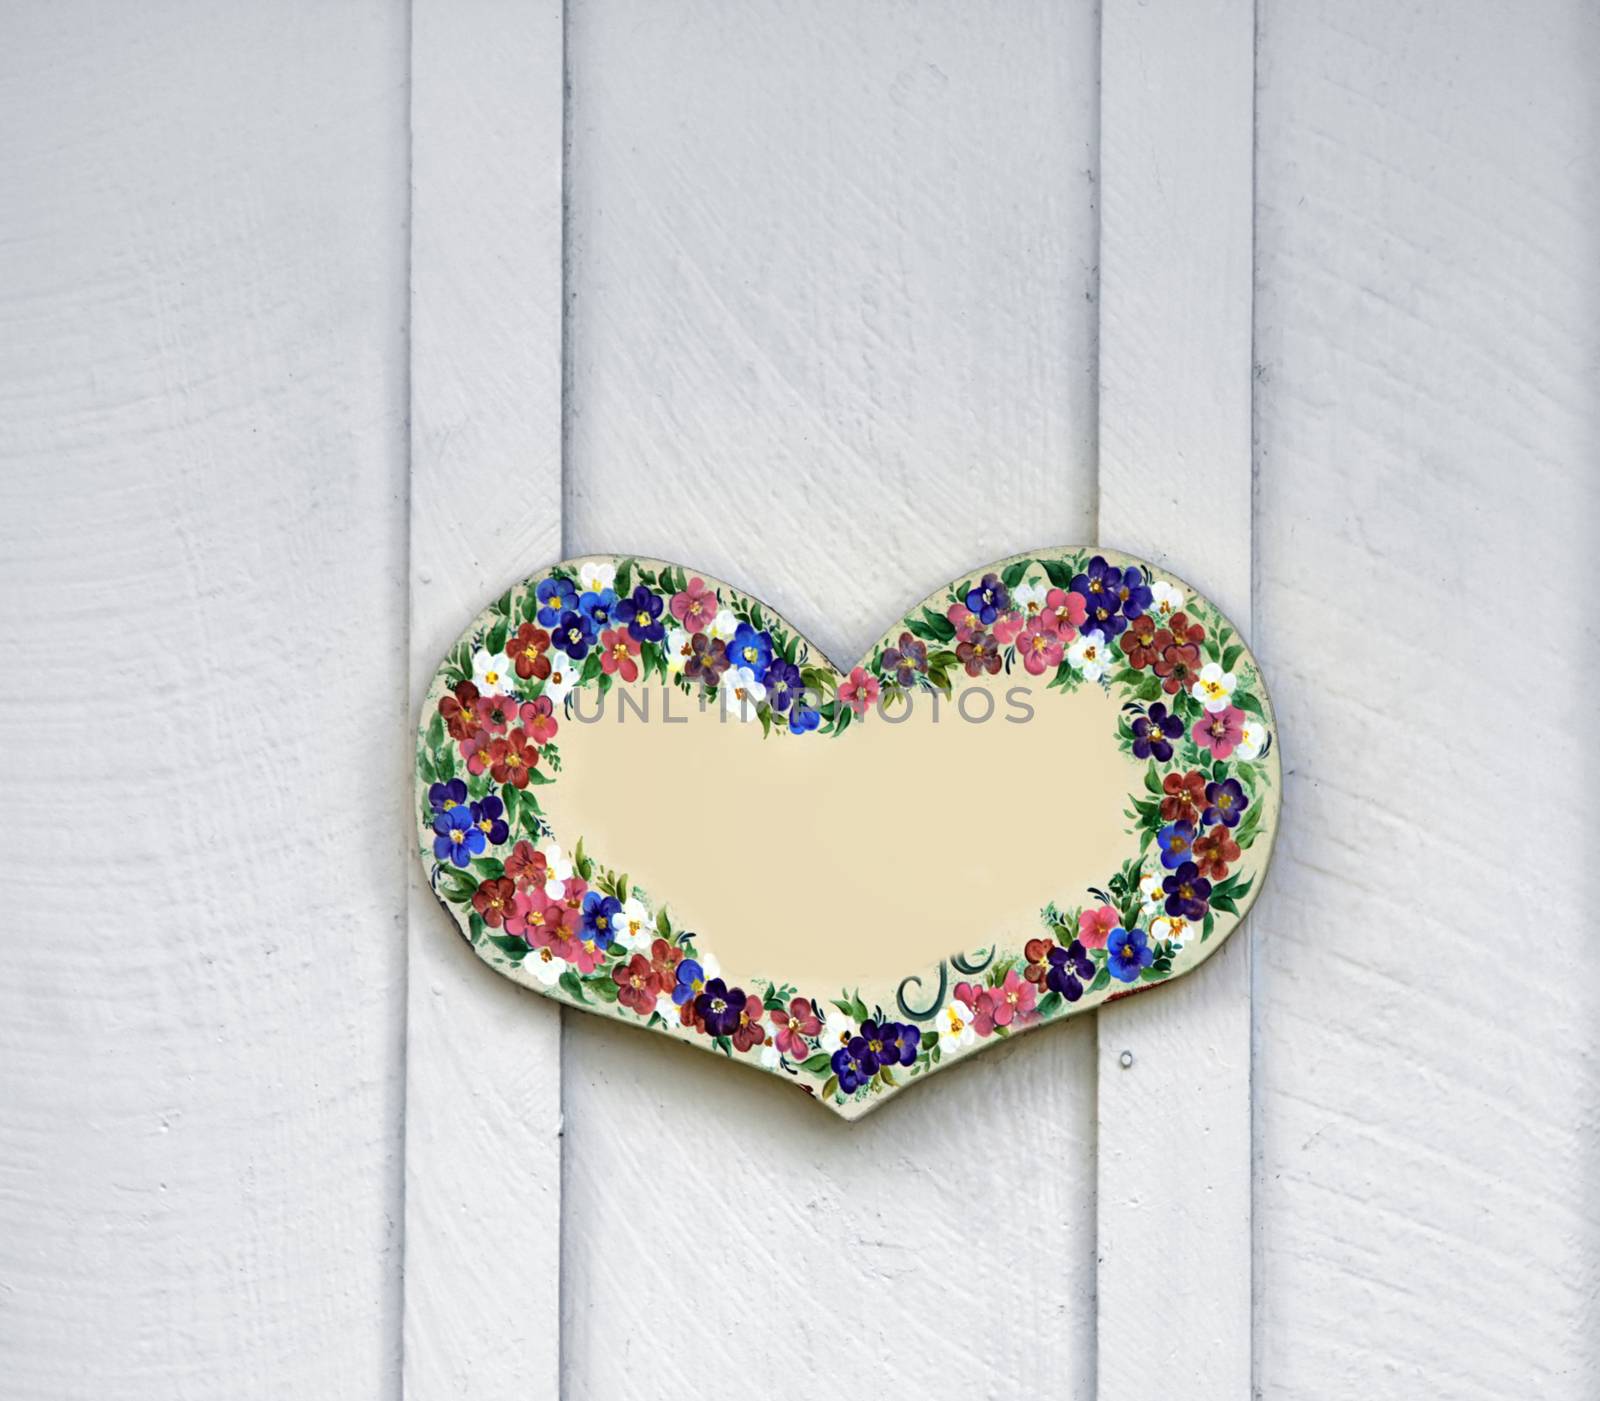 Wooden heart with painted flowers, like decoration on a wooden door